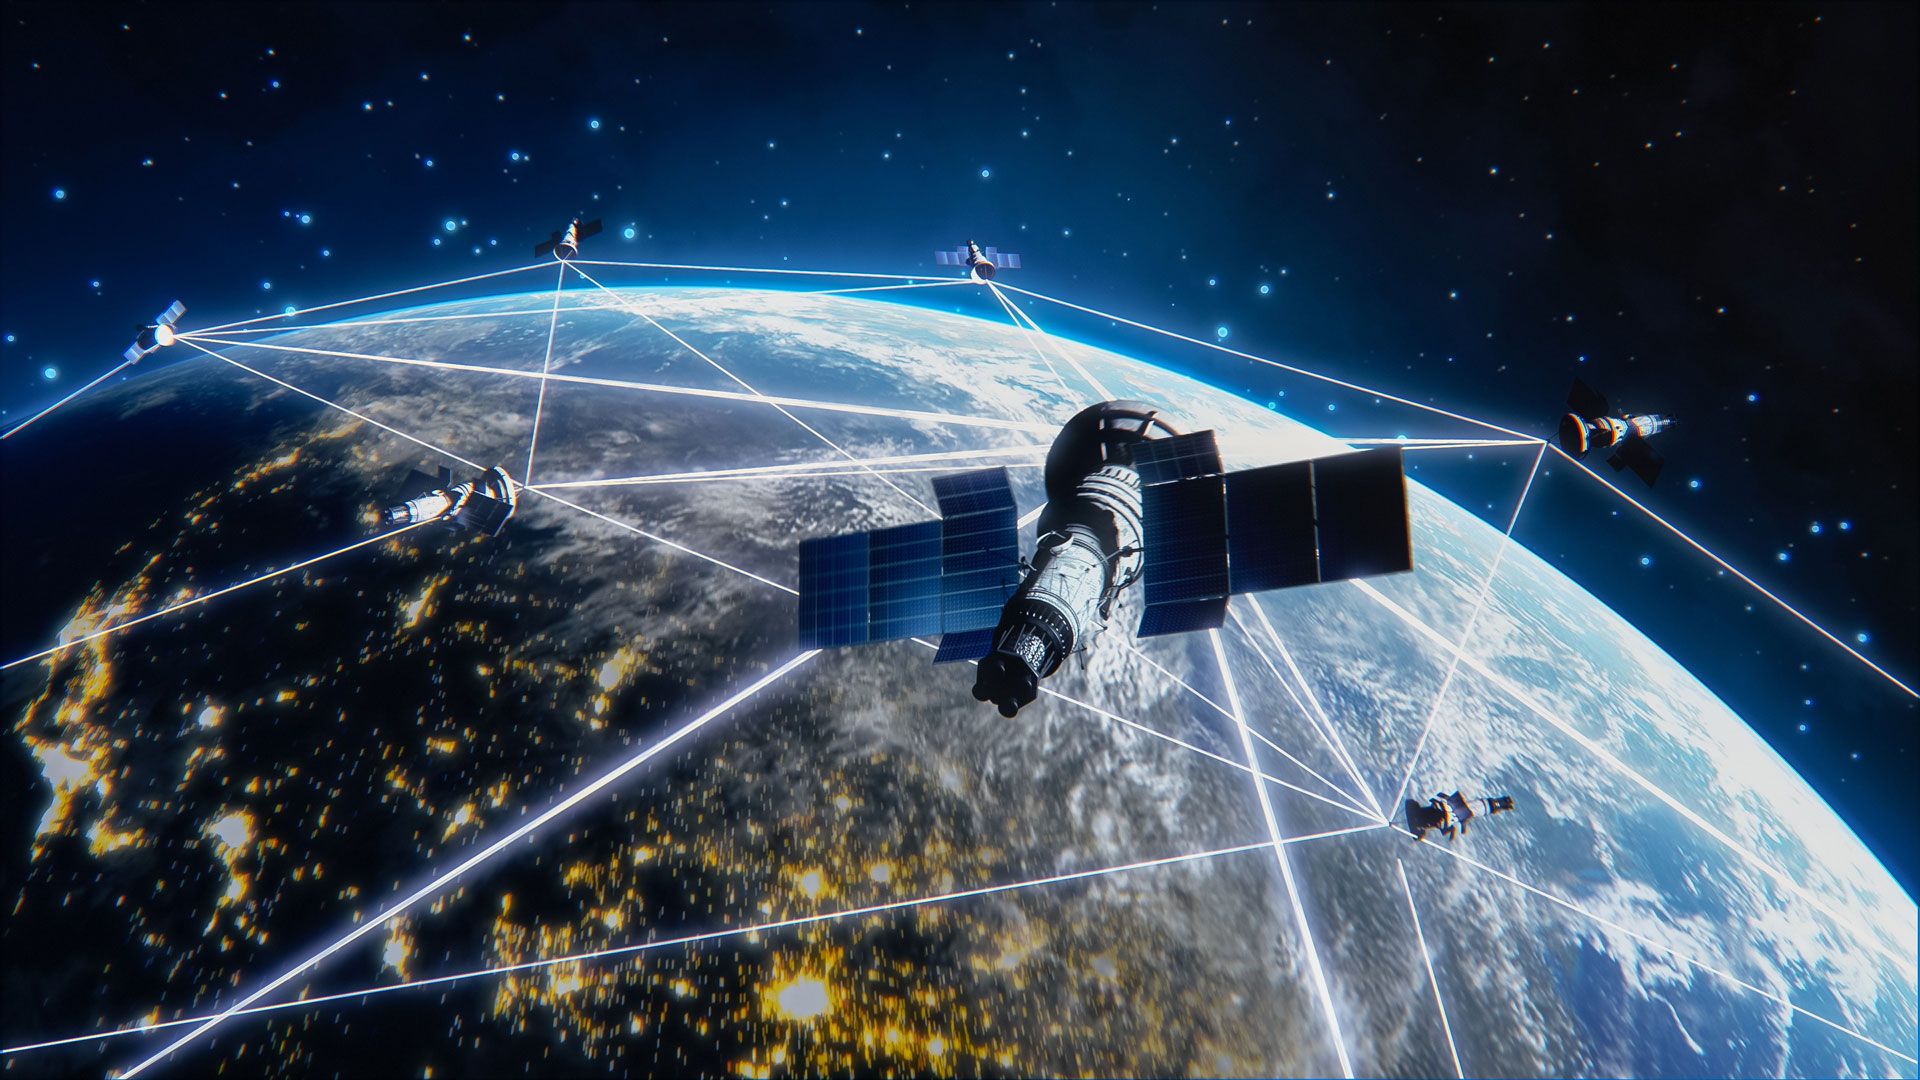 Coordinating satellites for a connected future - ITU Hub